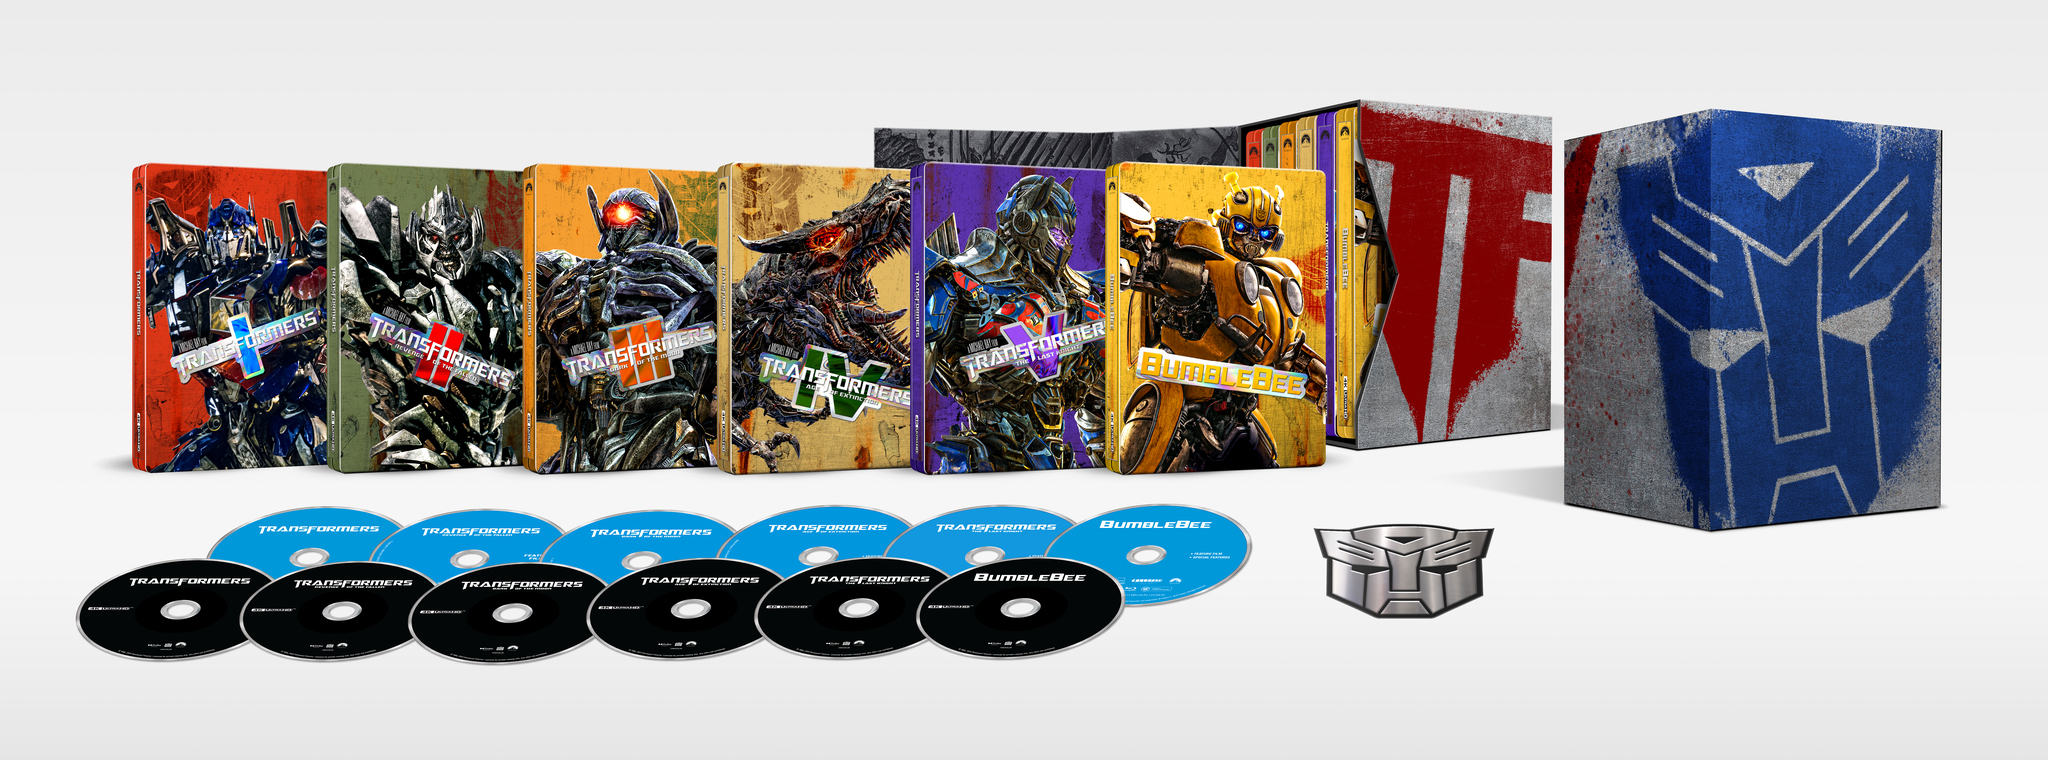 The Transformers: The Movie Official 30th Anniversary Blu-Ray